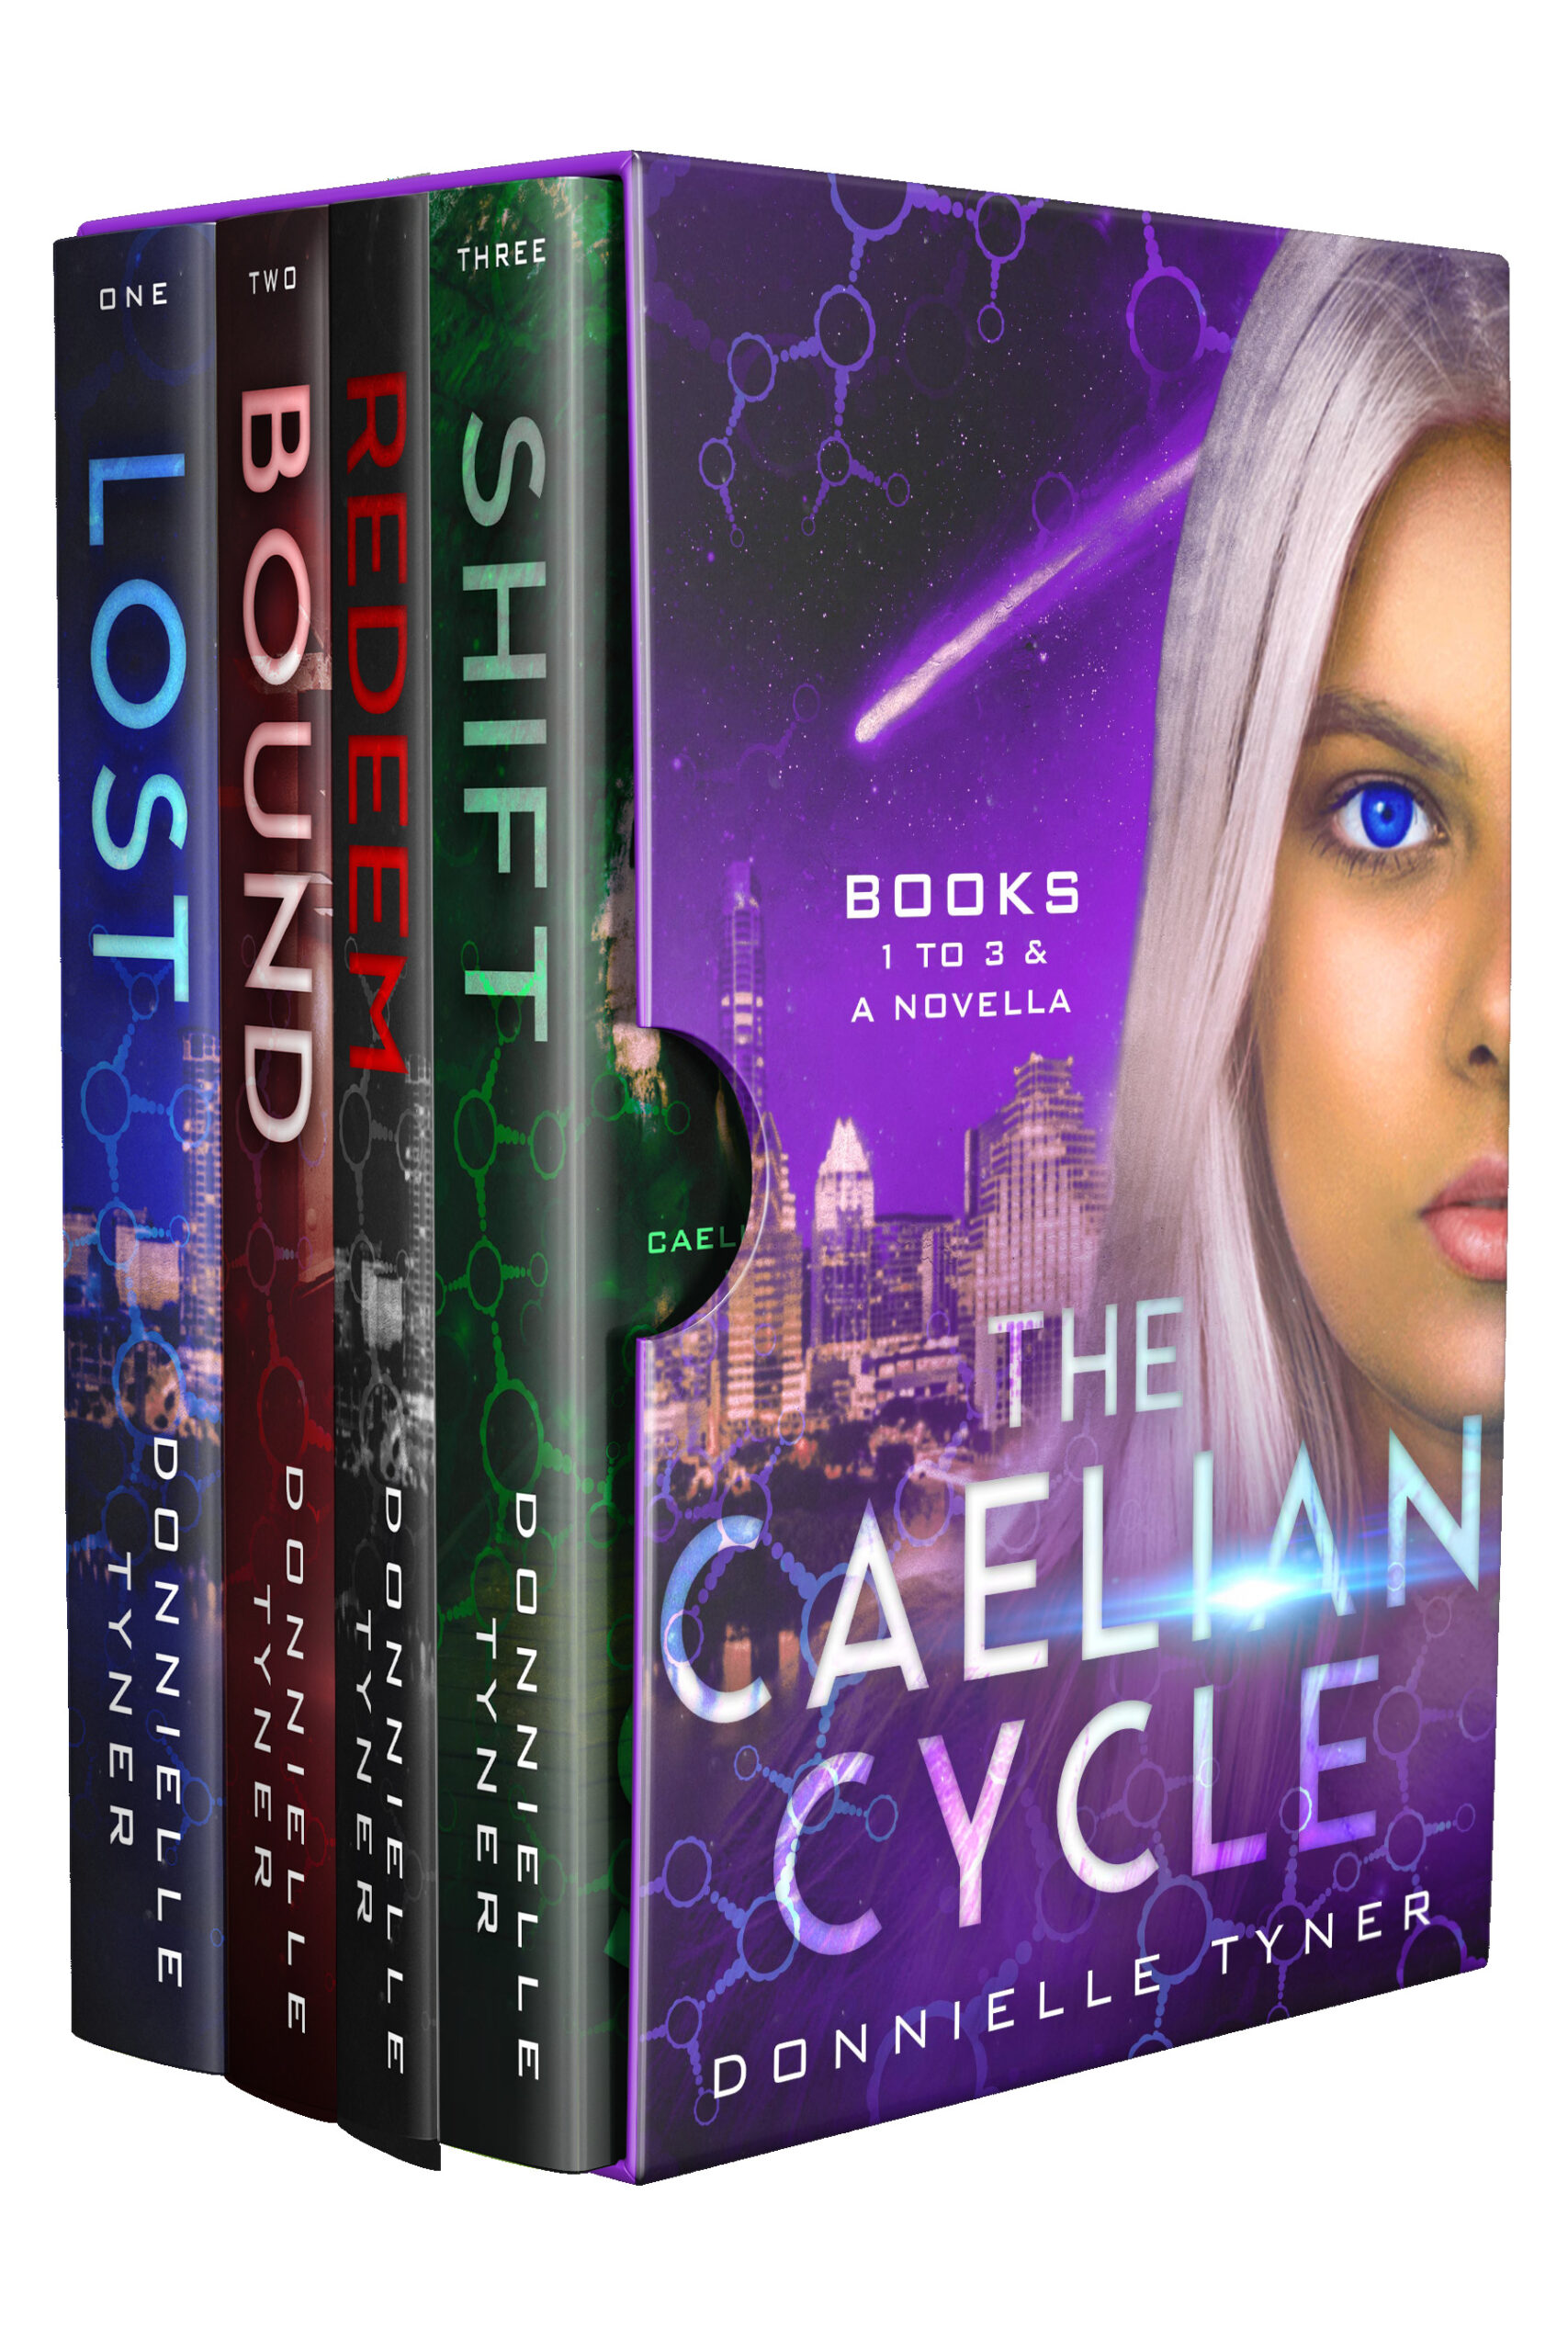 The Caelian Cycle Boxed Set